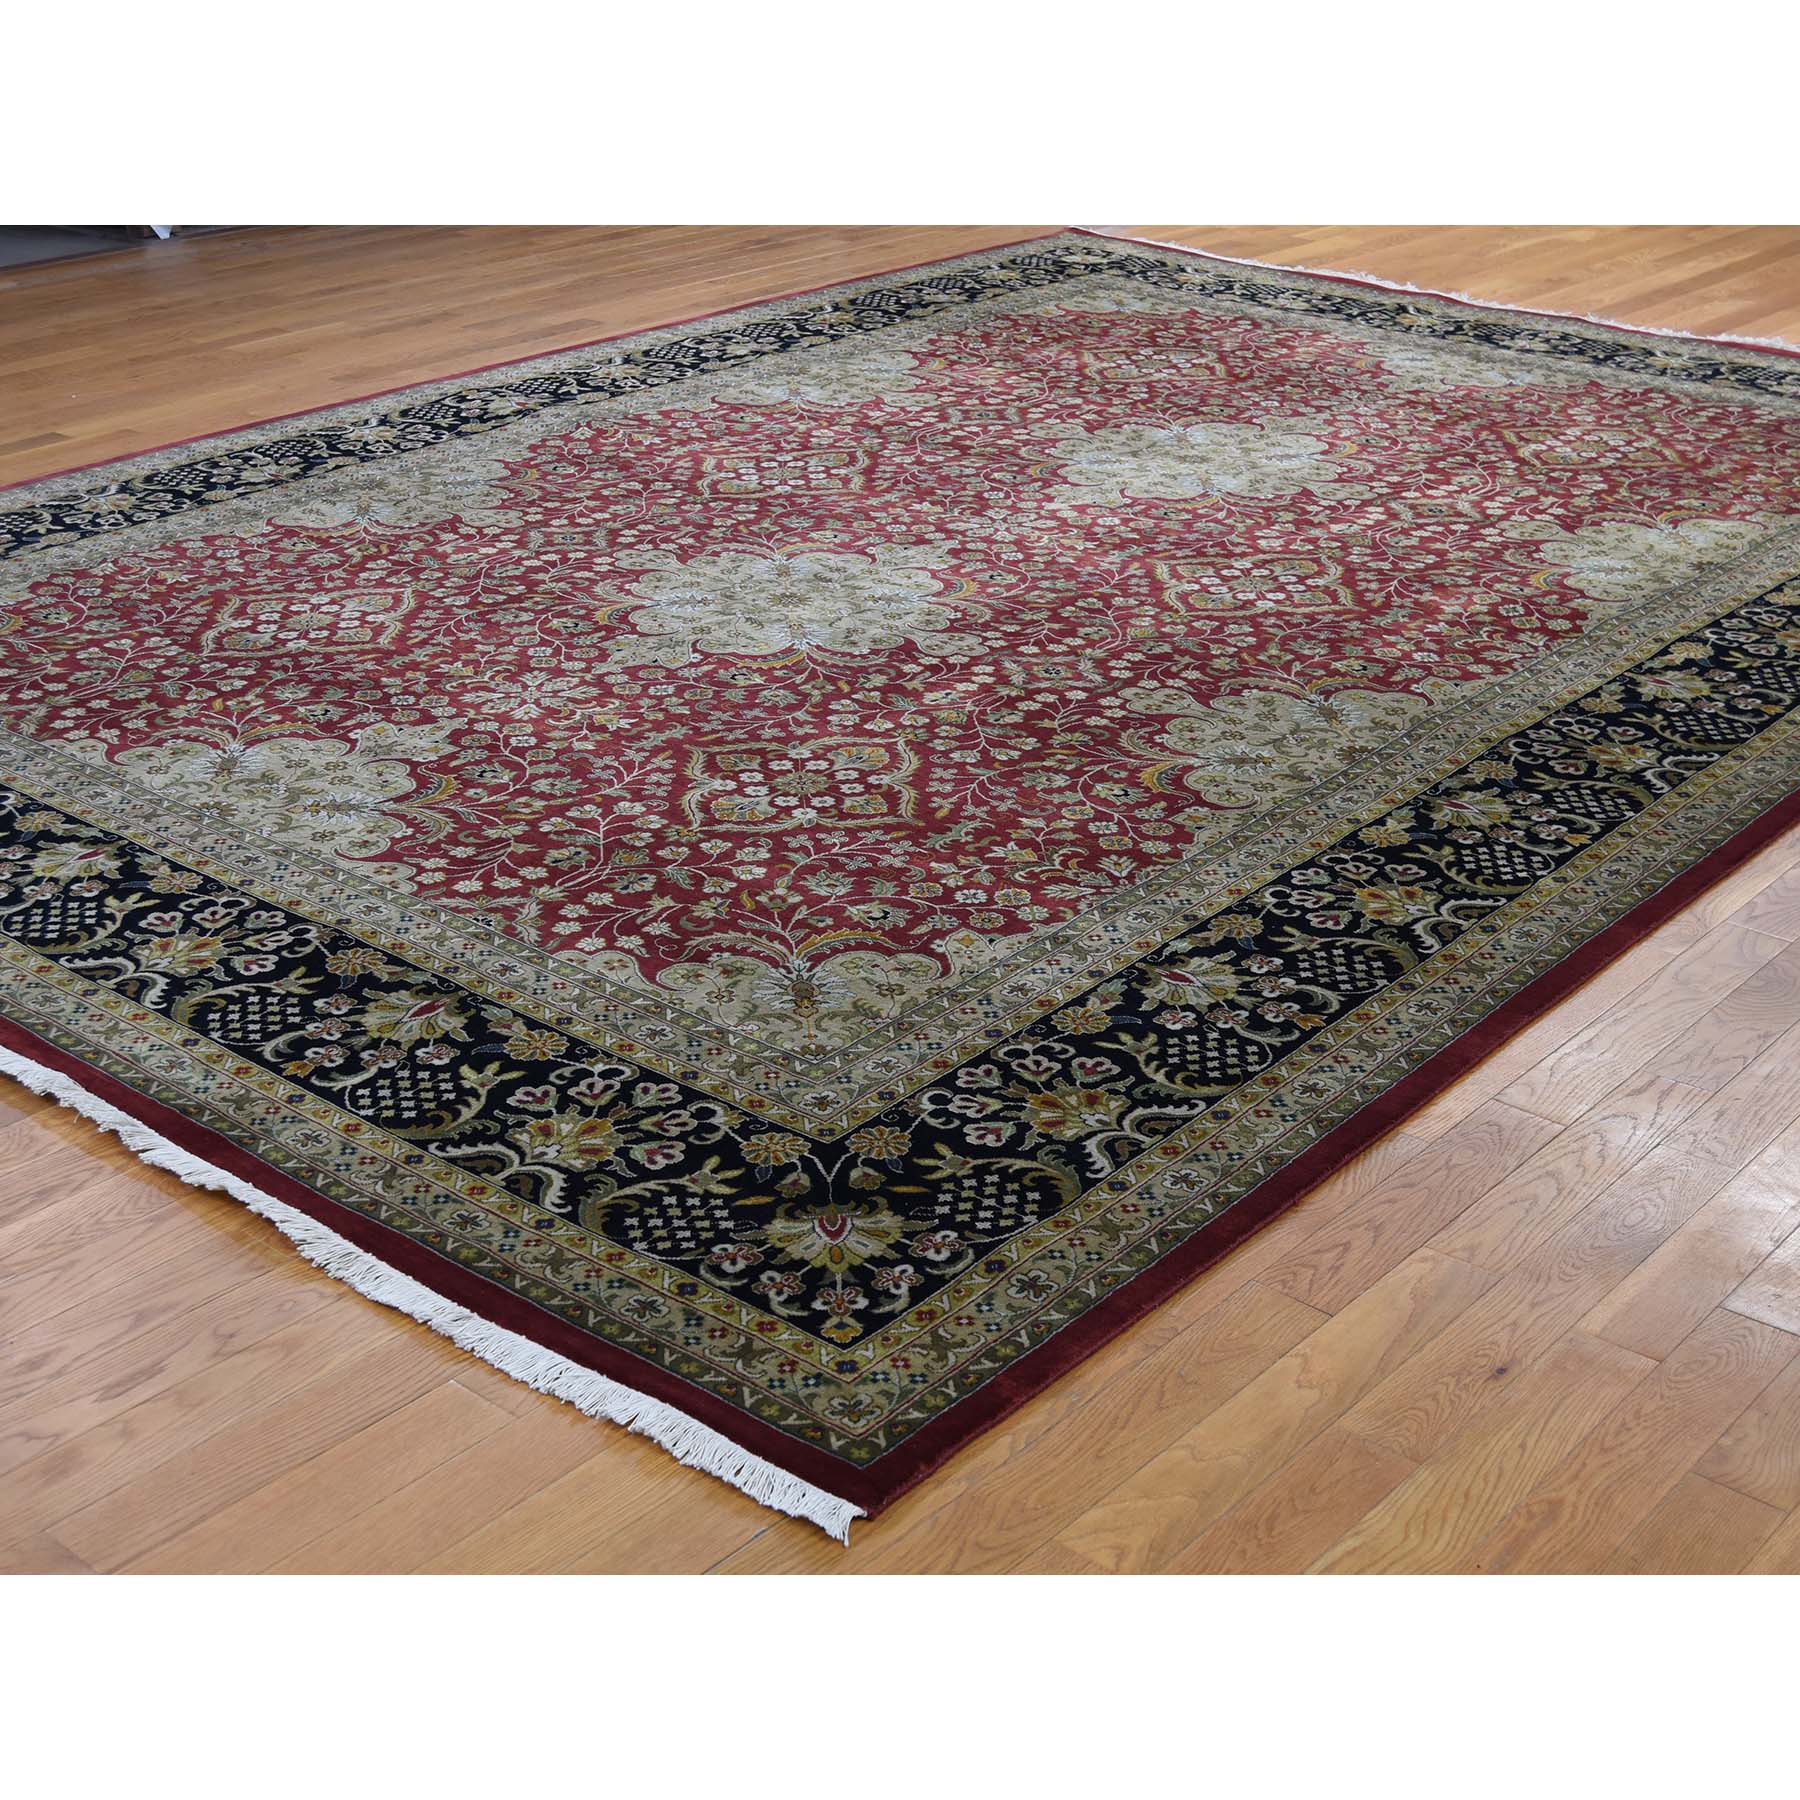 10-1 x13-8  New Zealand Wool 300 Kpsi Kashan Revival Hand-Knotted Rug 